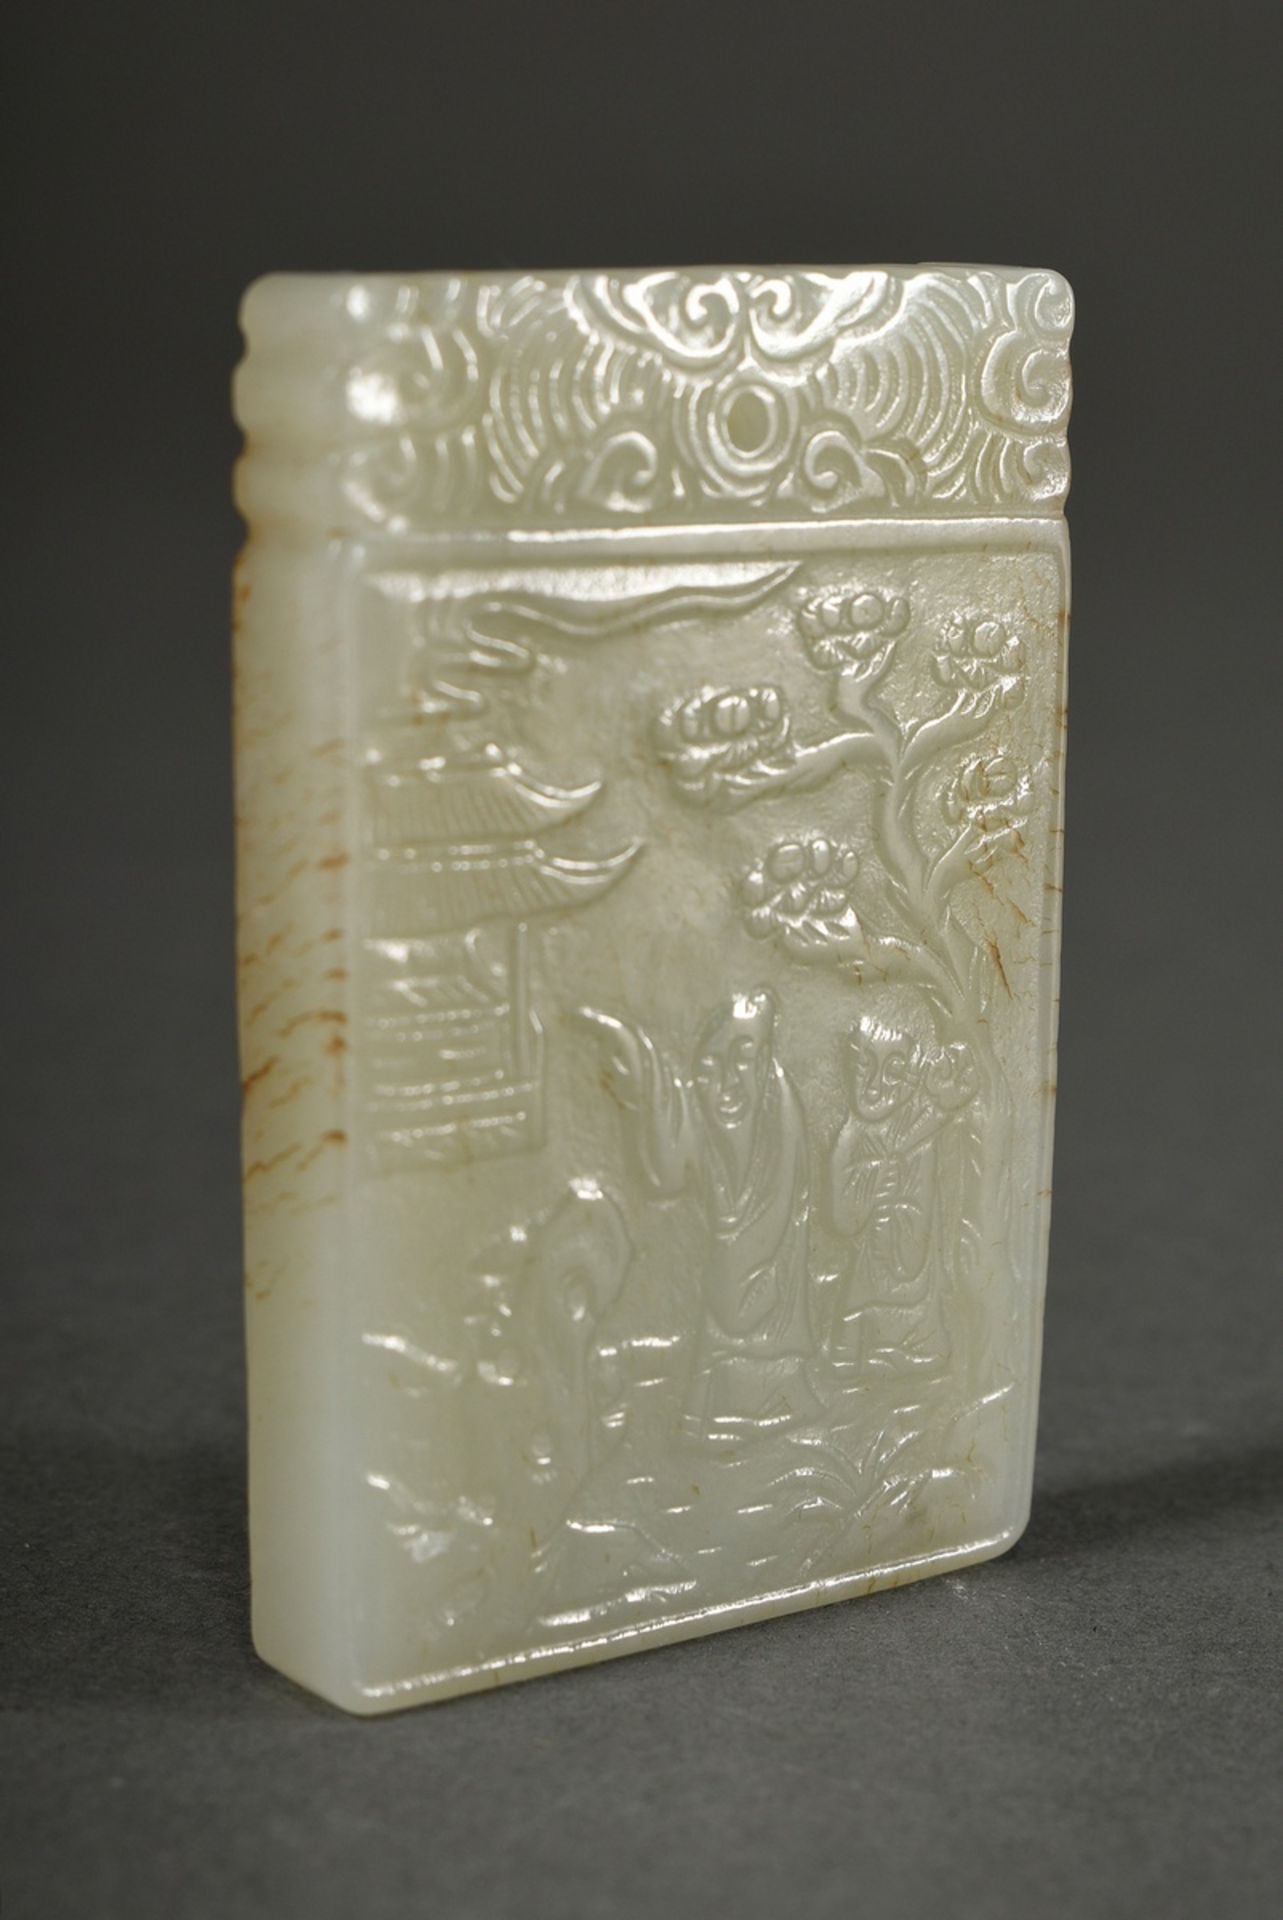 Seladon jade plaque "Two Wise Men in the Garden", characters on verso, depictions in low relief, wo - Image 2 of 6